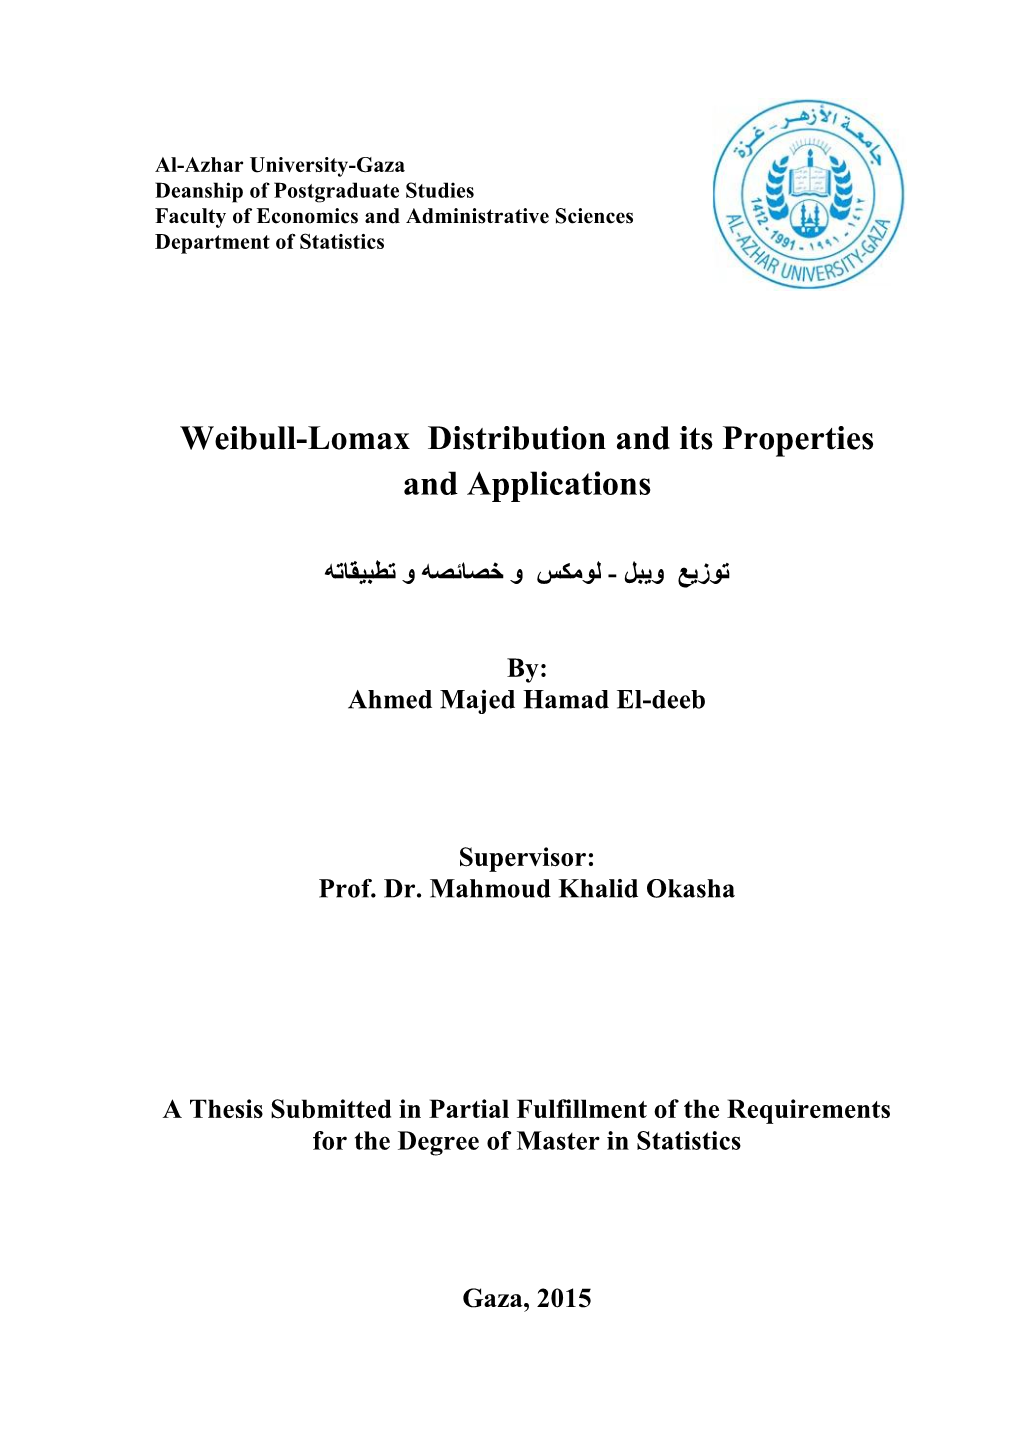 Weibull-Lomax Distribution and Its Properties and Applications